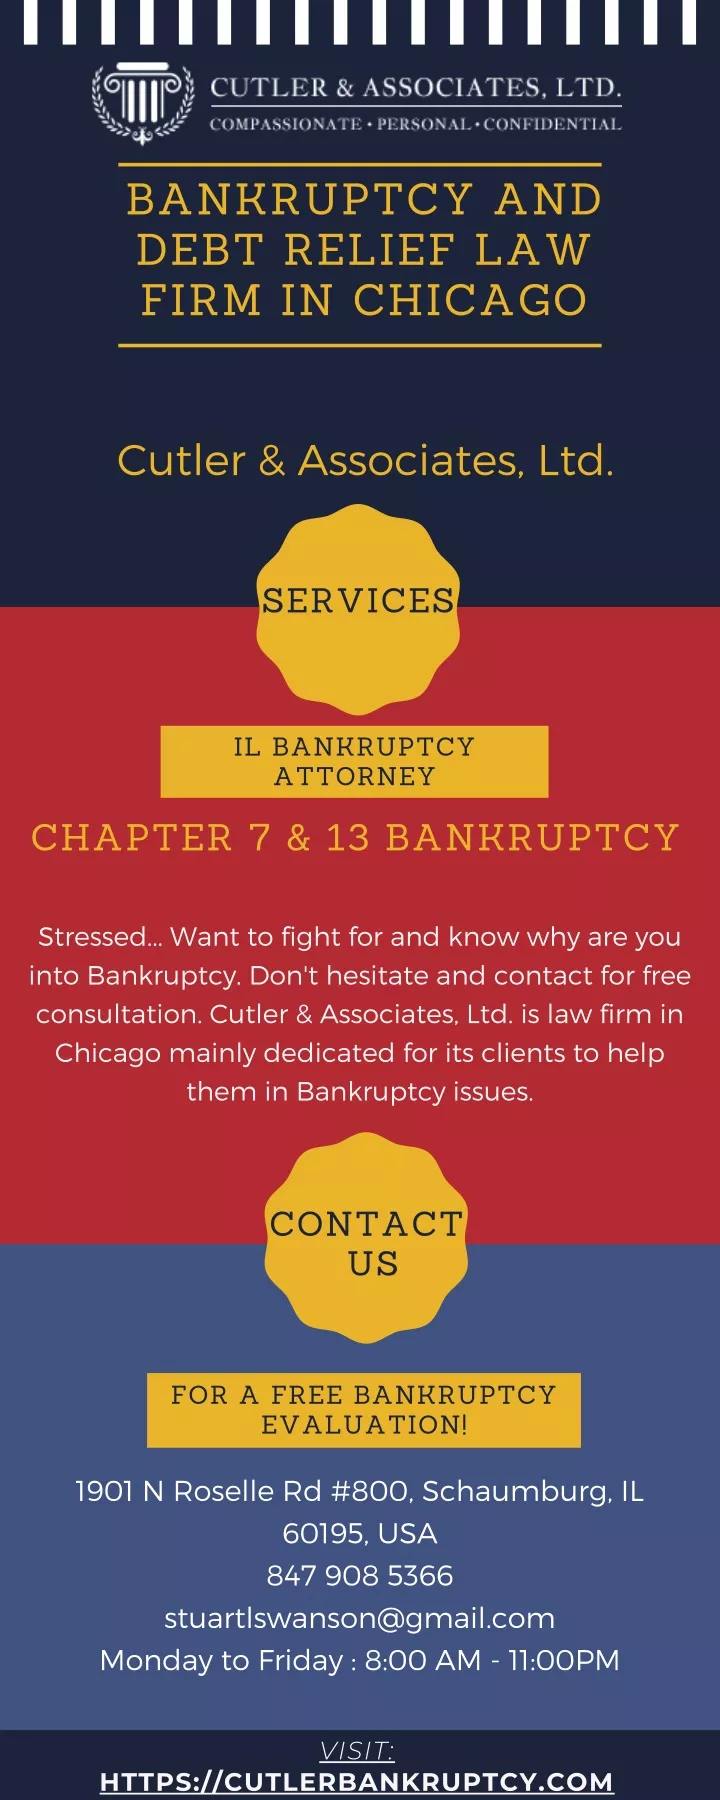 bankruptcy and debt relief law firm in chicago